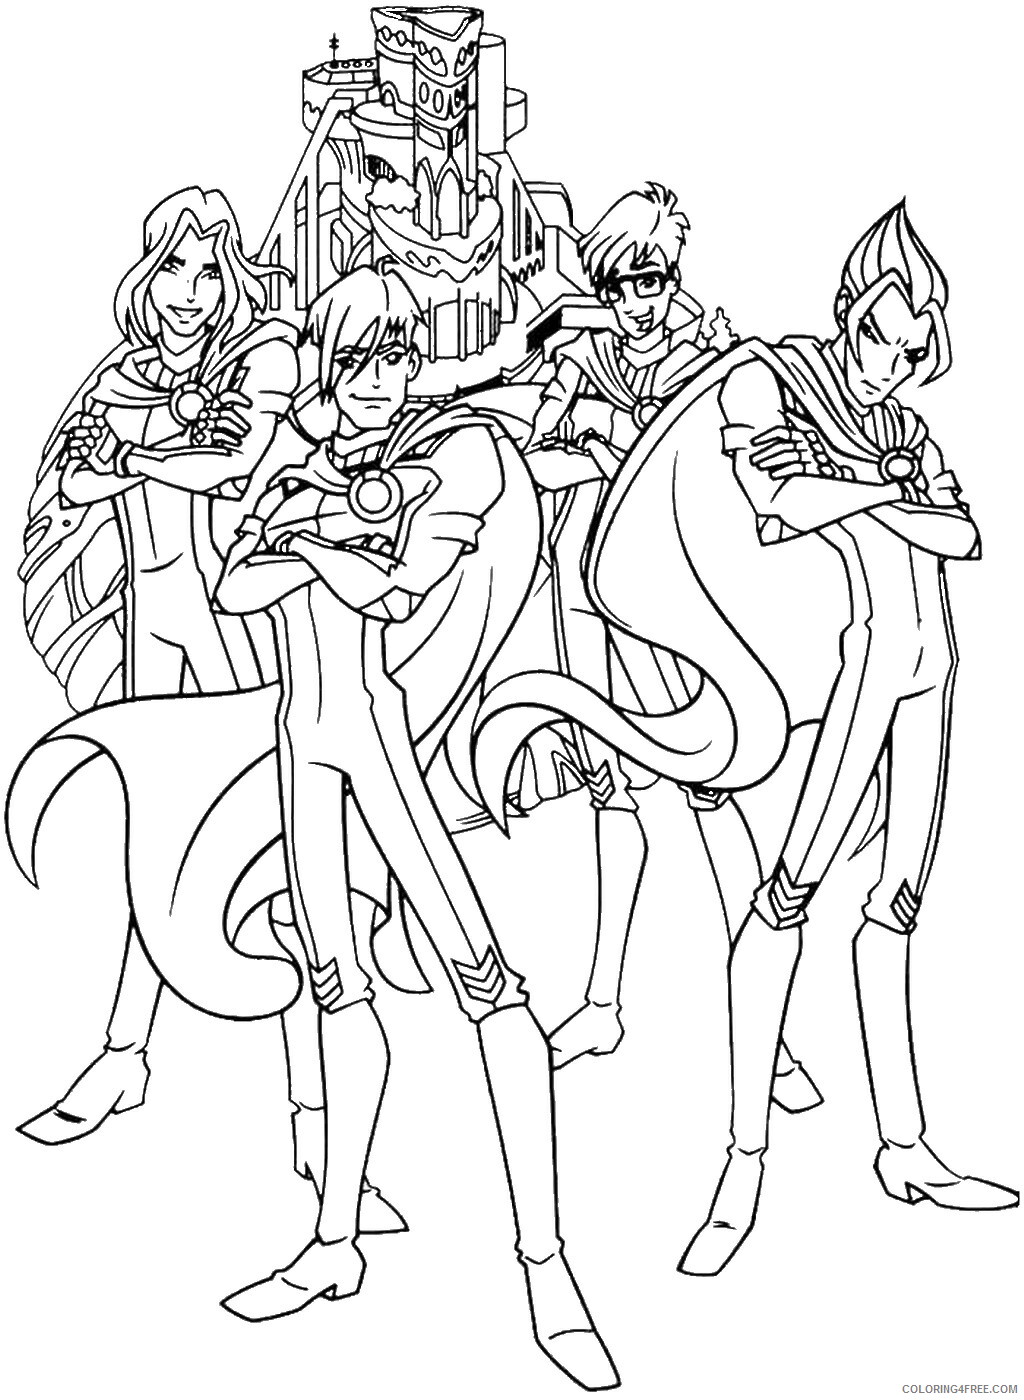 Winx Coloring Pages TV Film winx_cl_33 Printable 2020 11392 Coloring4free